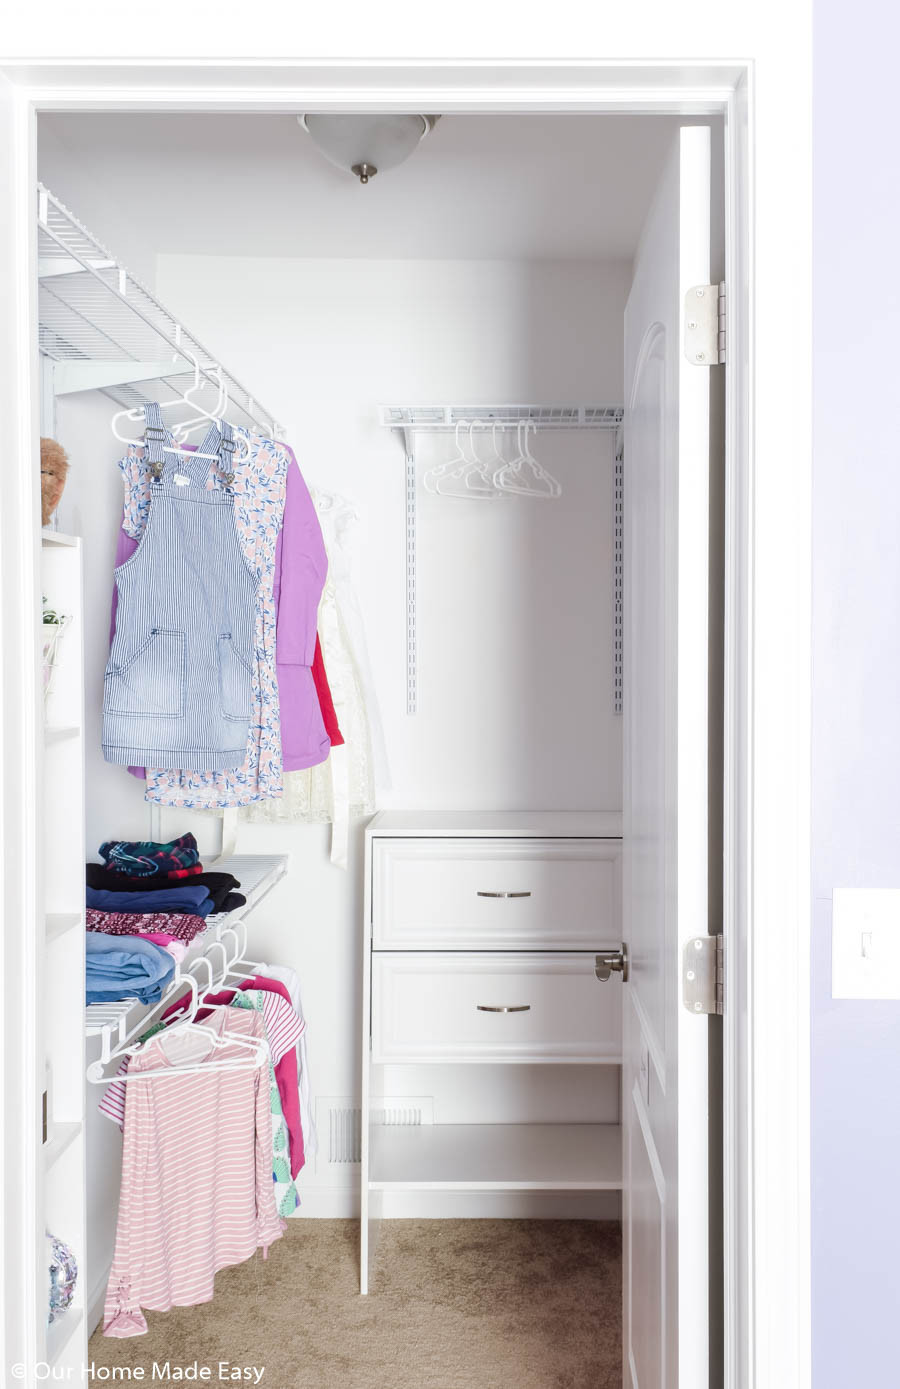 Small Bedroom Closet
 Our DIY Small Bedroom Organization Makeover